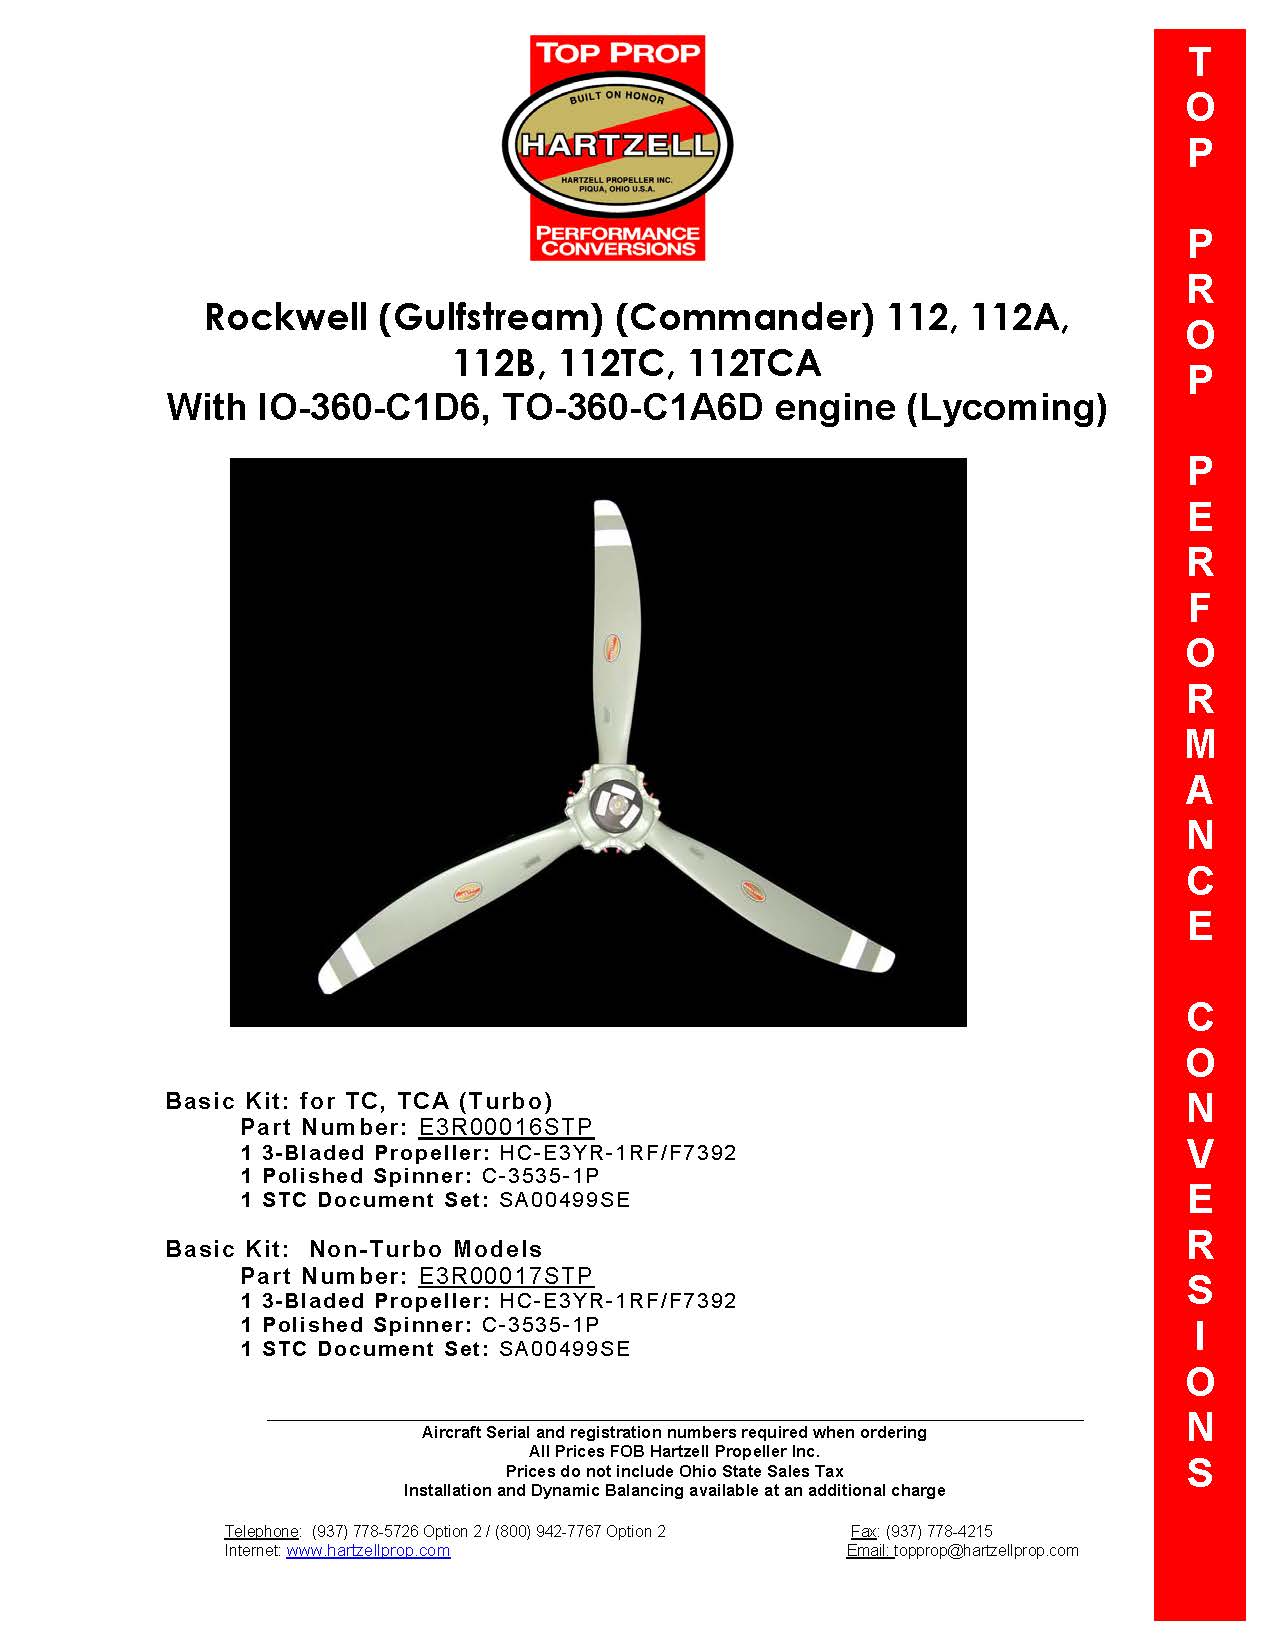 Hartzell STC Rockwell (Gulfstream)(Commander) 112, 112A, 112B, 112TC, 112TCA With IO-360-C1D6, TO-360-C1A6D Engine (3-Blade Scimitar)